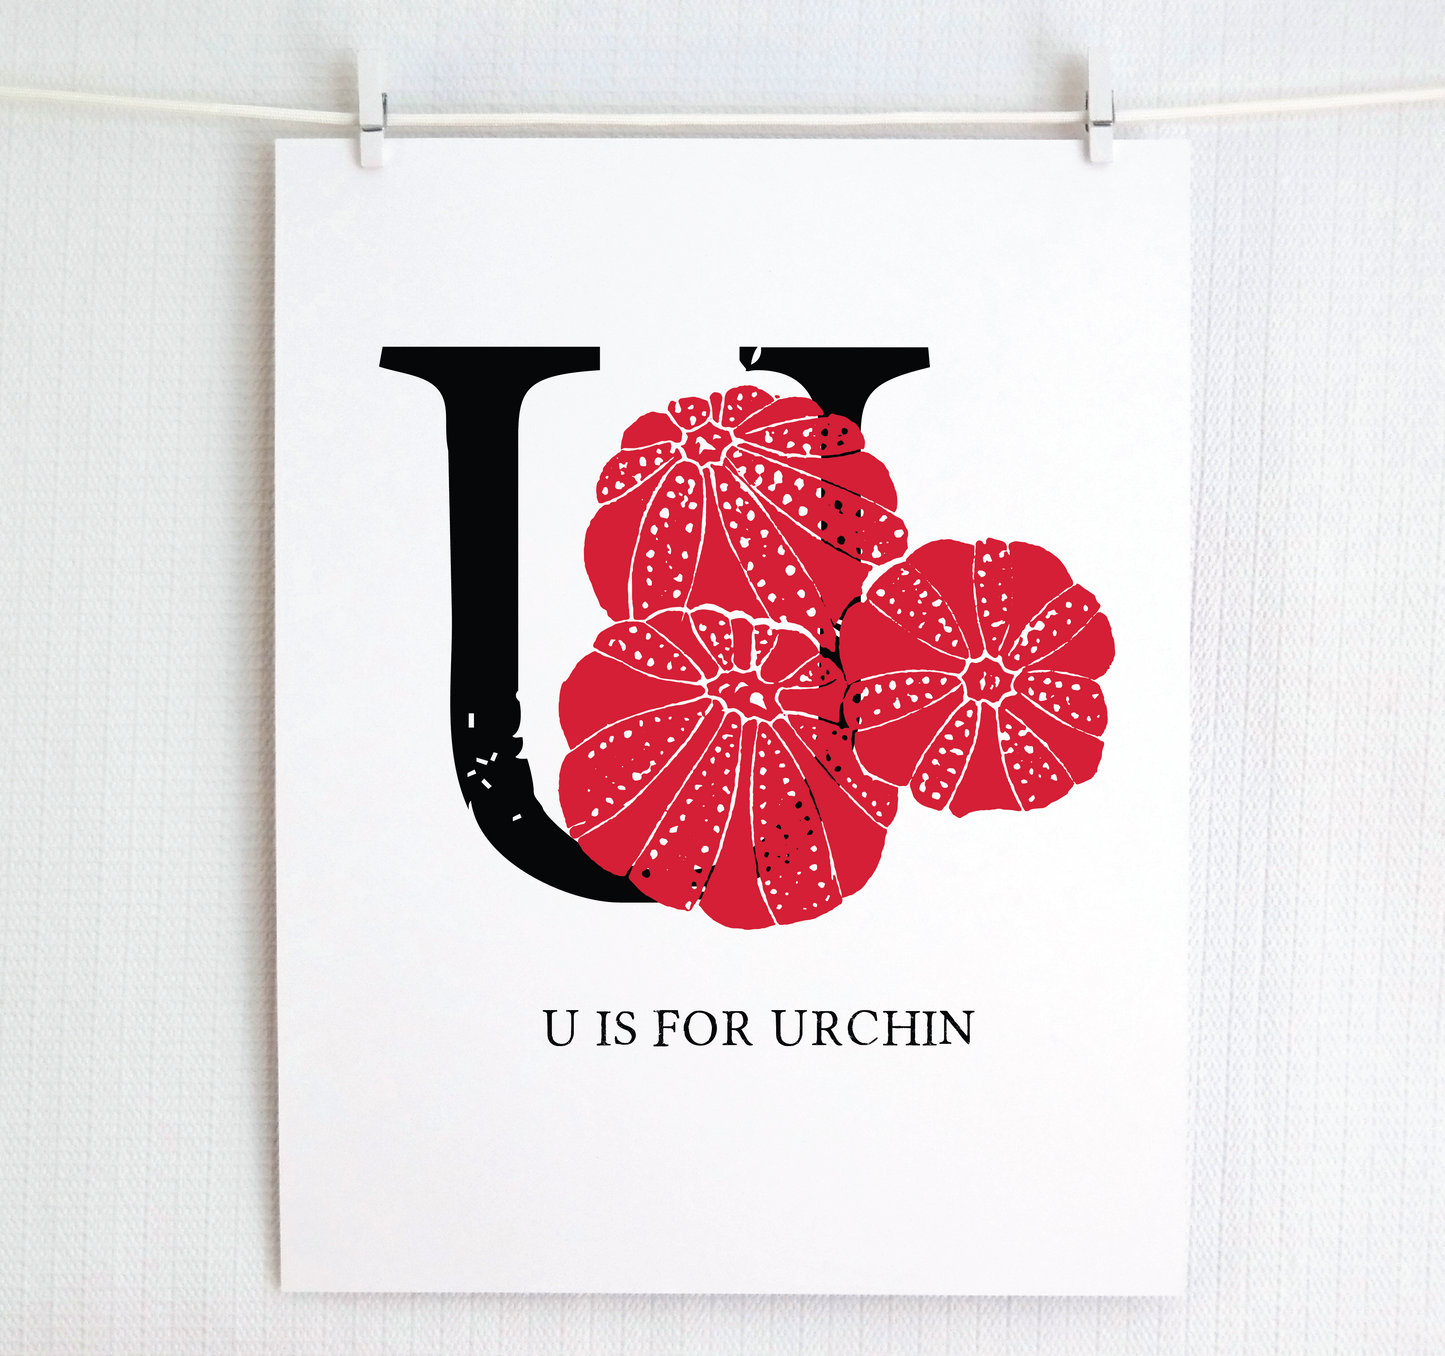 U is for Urchin